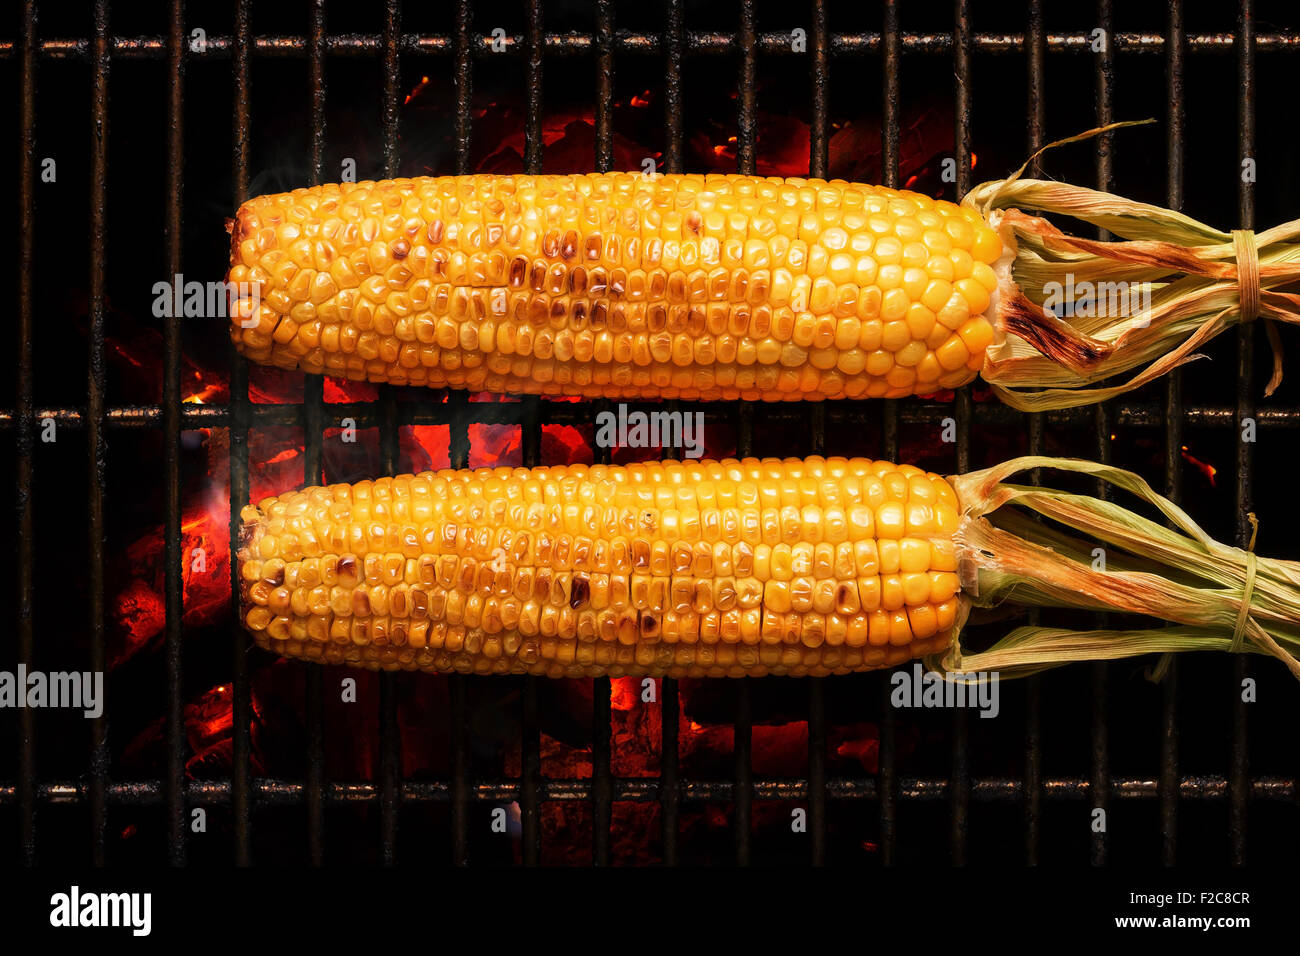 Whole Sweet Corn with leaves grilled on hot coal fire. Seen from above Stock Photo